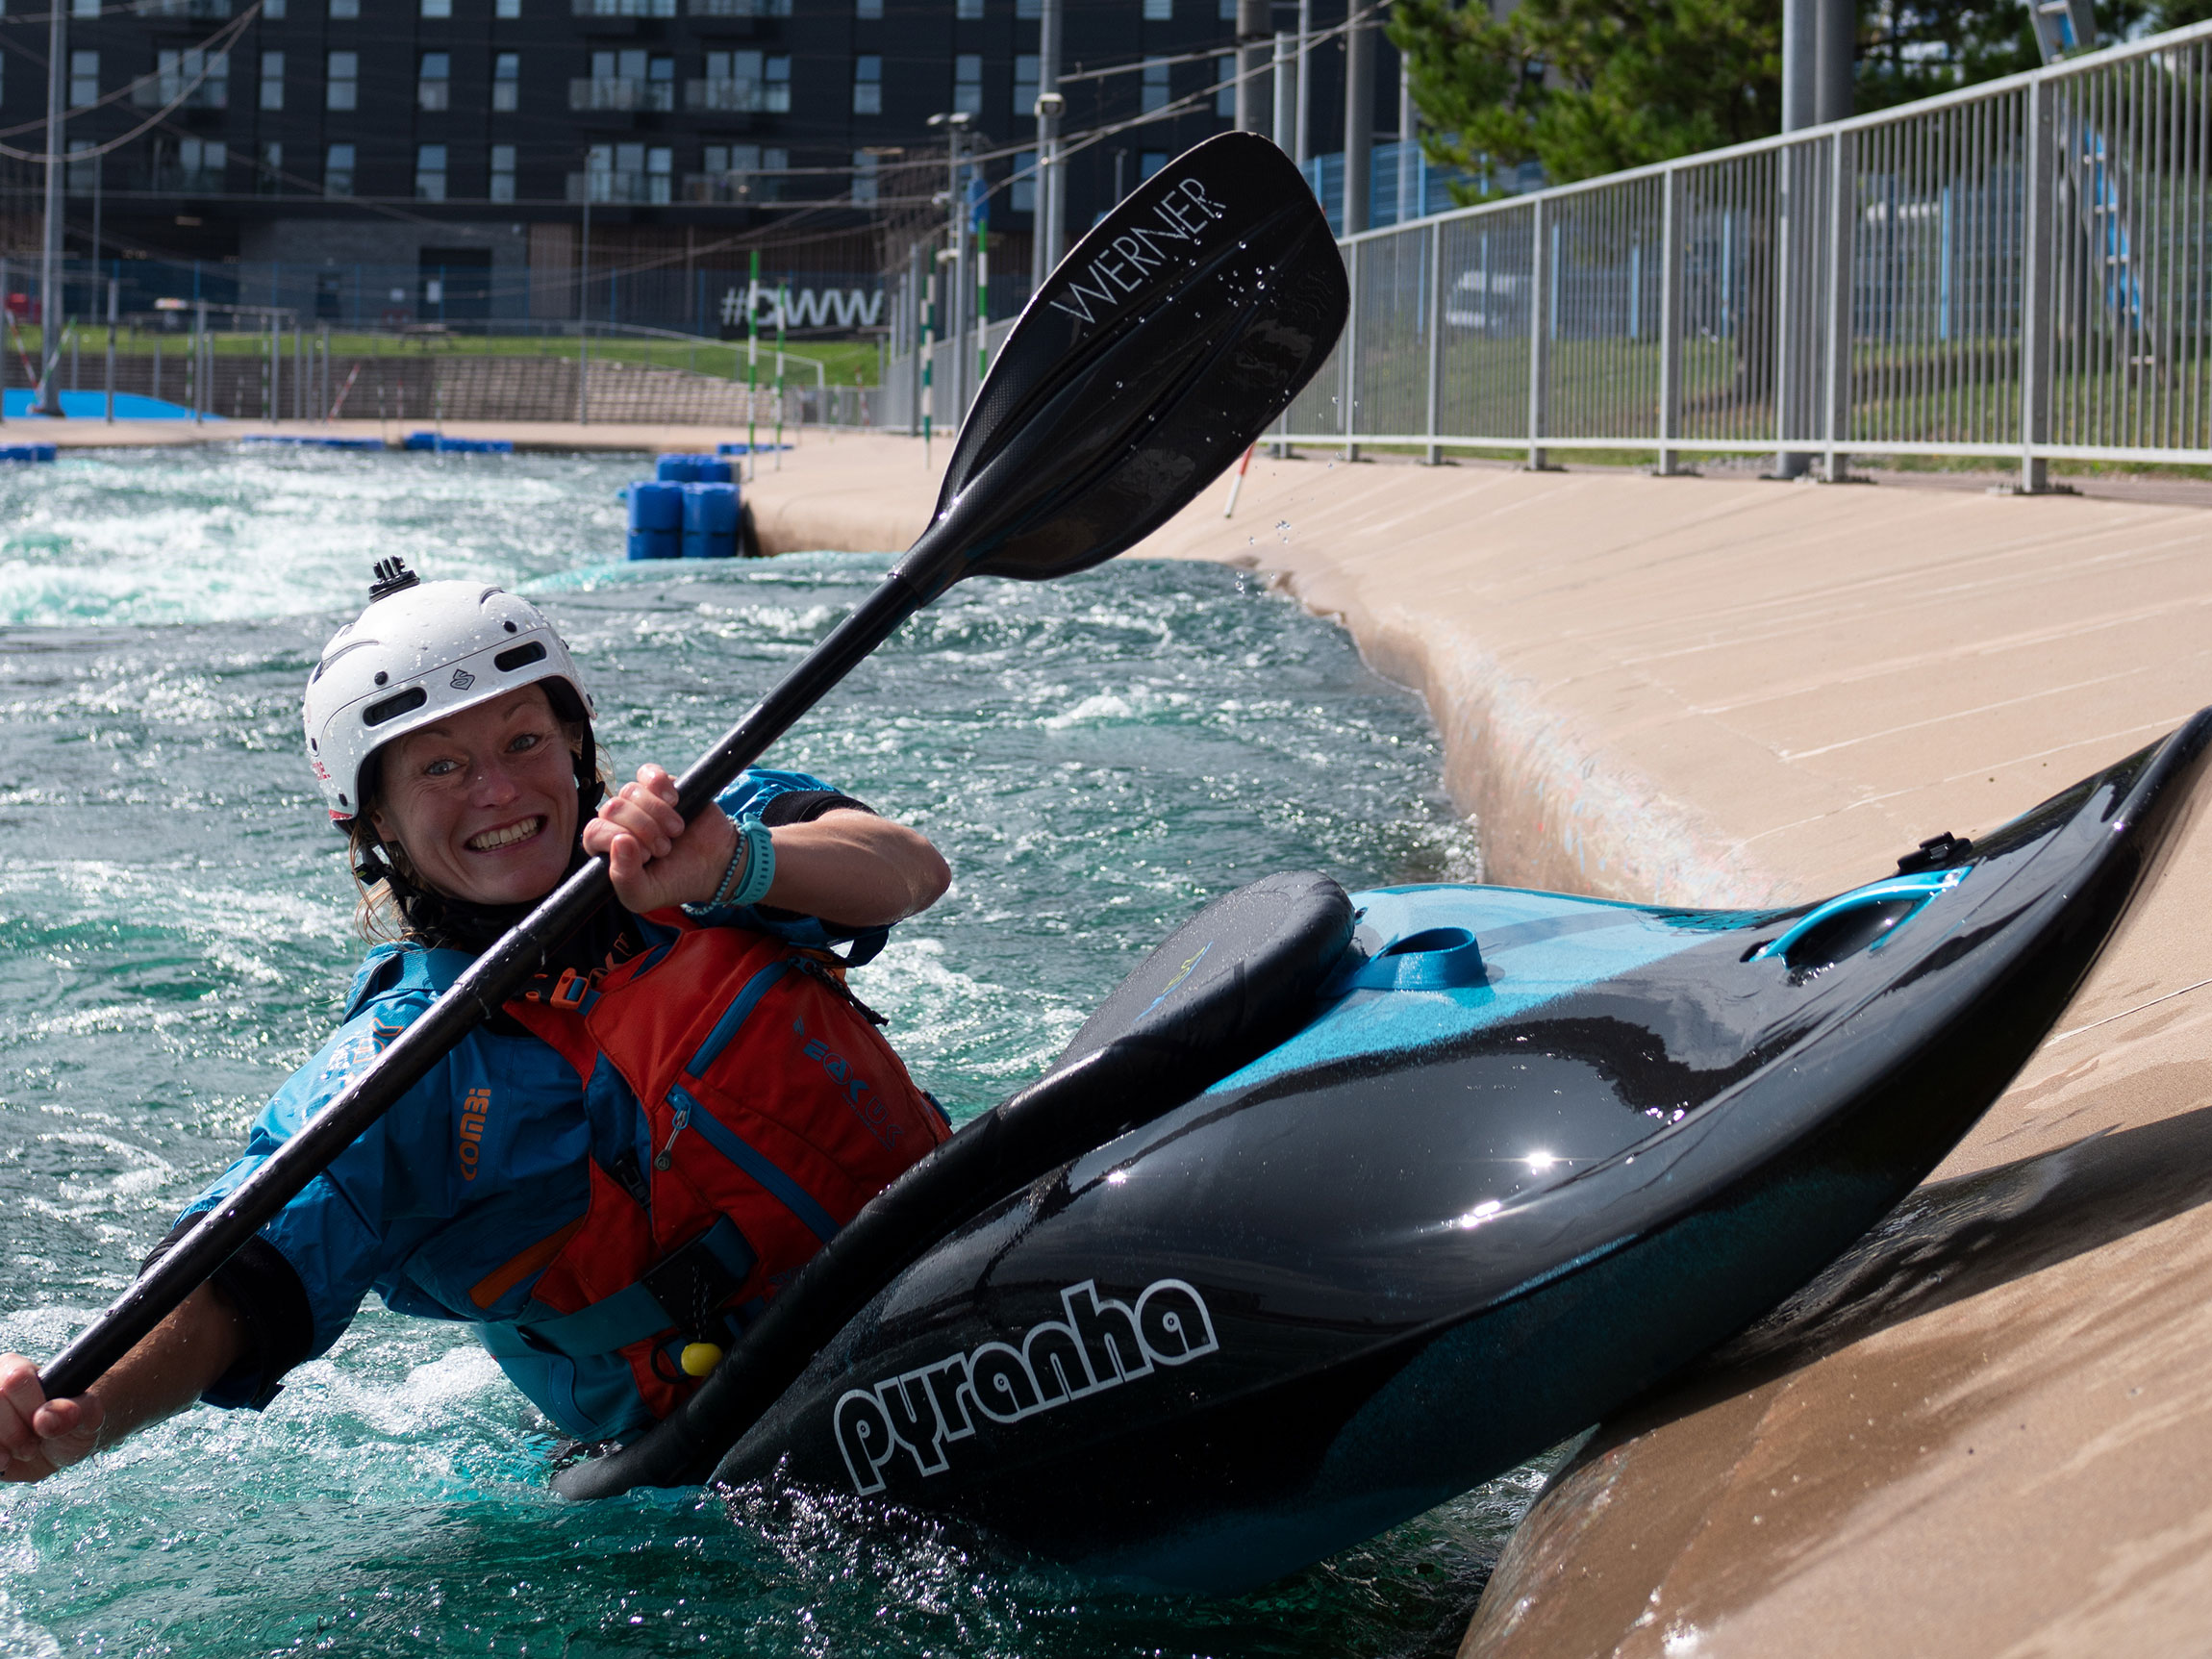 Pyranha Blog » Kayaking Articles from Pyranha Staff, Team Paddlers, and Friends